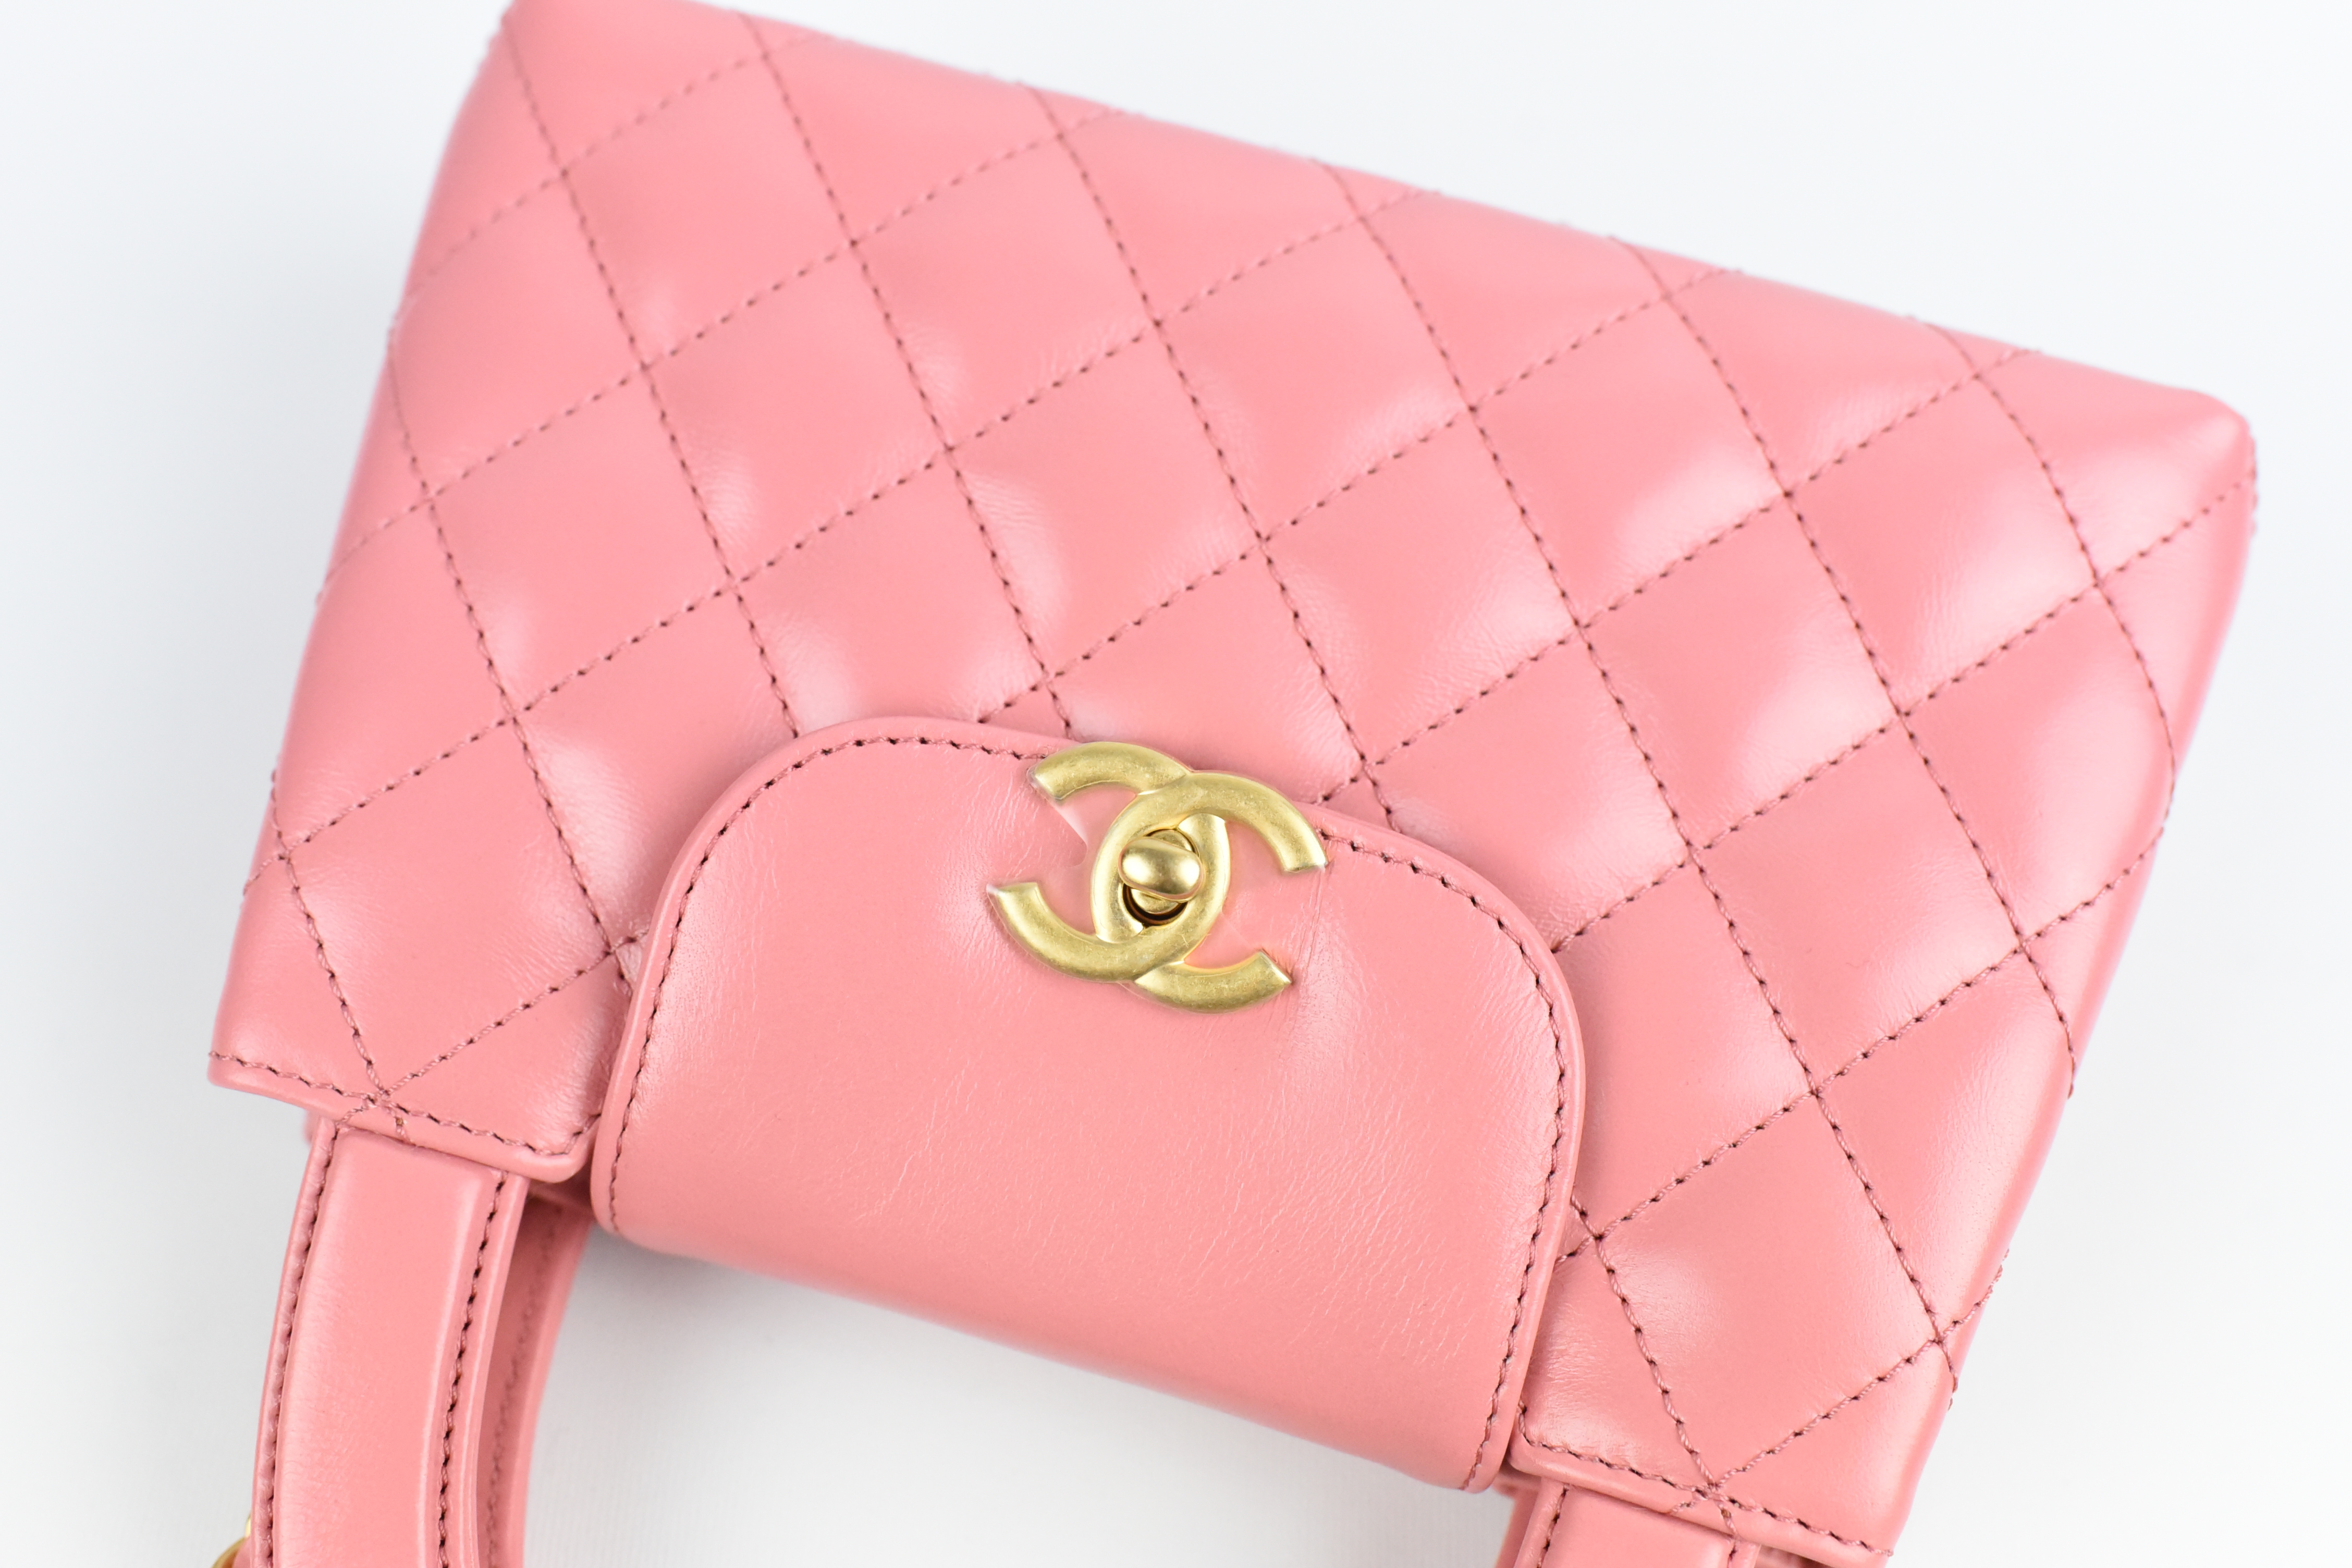 Chanel Kelly Bag Small, Pink Calfskin Leather with Gold Hardware